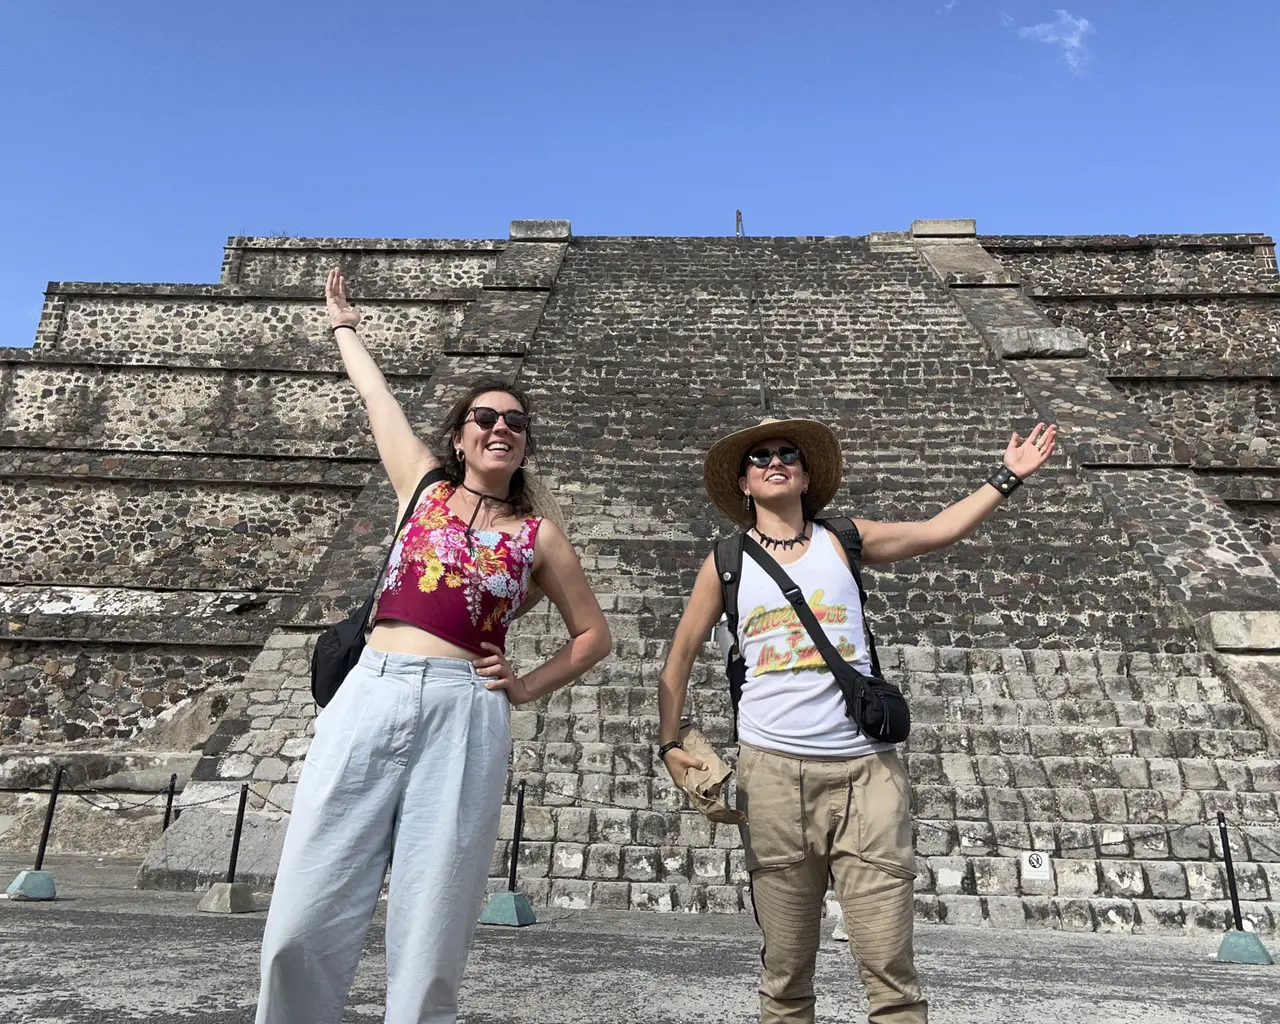 Tanaquil Márquez and Ximena Violante posing in front of the Moon pyramid at Teotihuacán Mexico